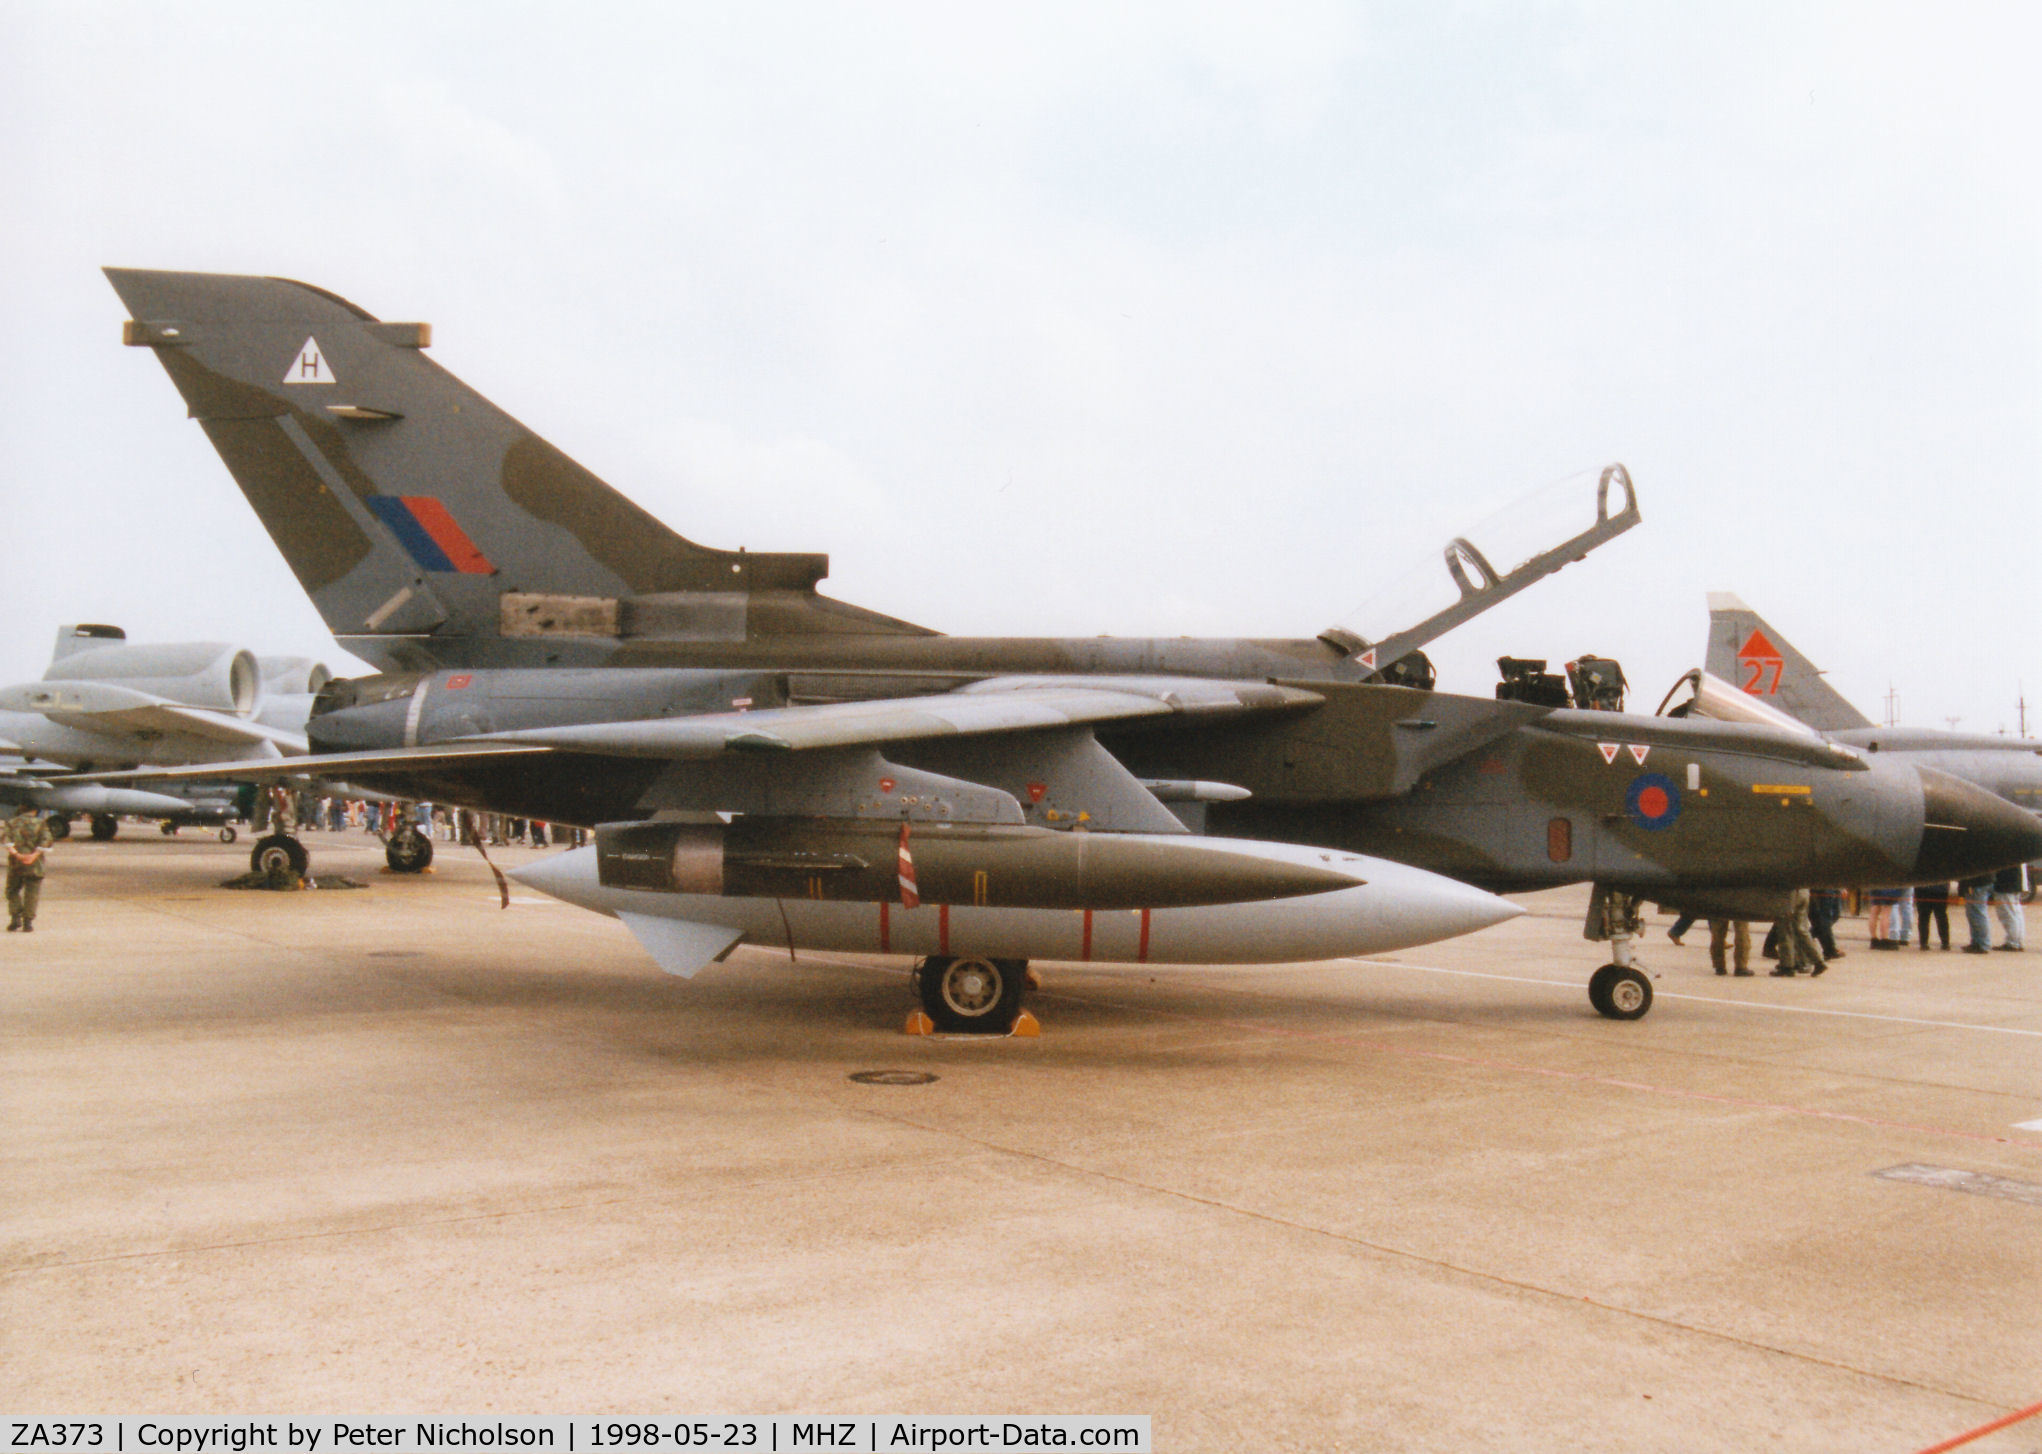 ZA373, 1982 Panavia Tornado GR.1A C/N 175/BS055/3087, Another view of the Tornado GR.1A of 2 Squadron on display at the 1998 RAF Mildenhall Air Fete.